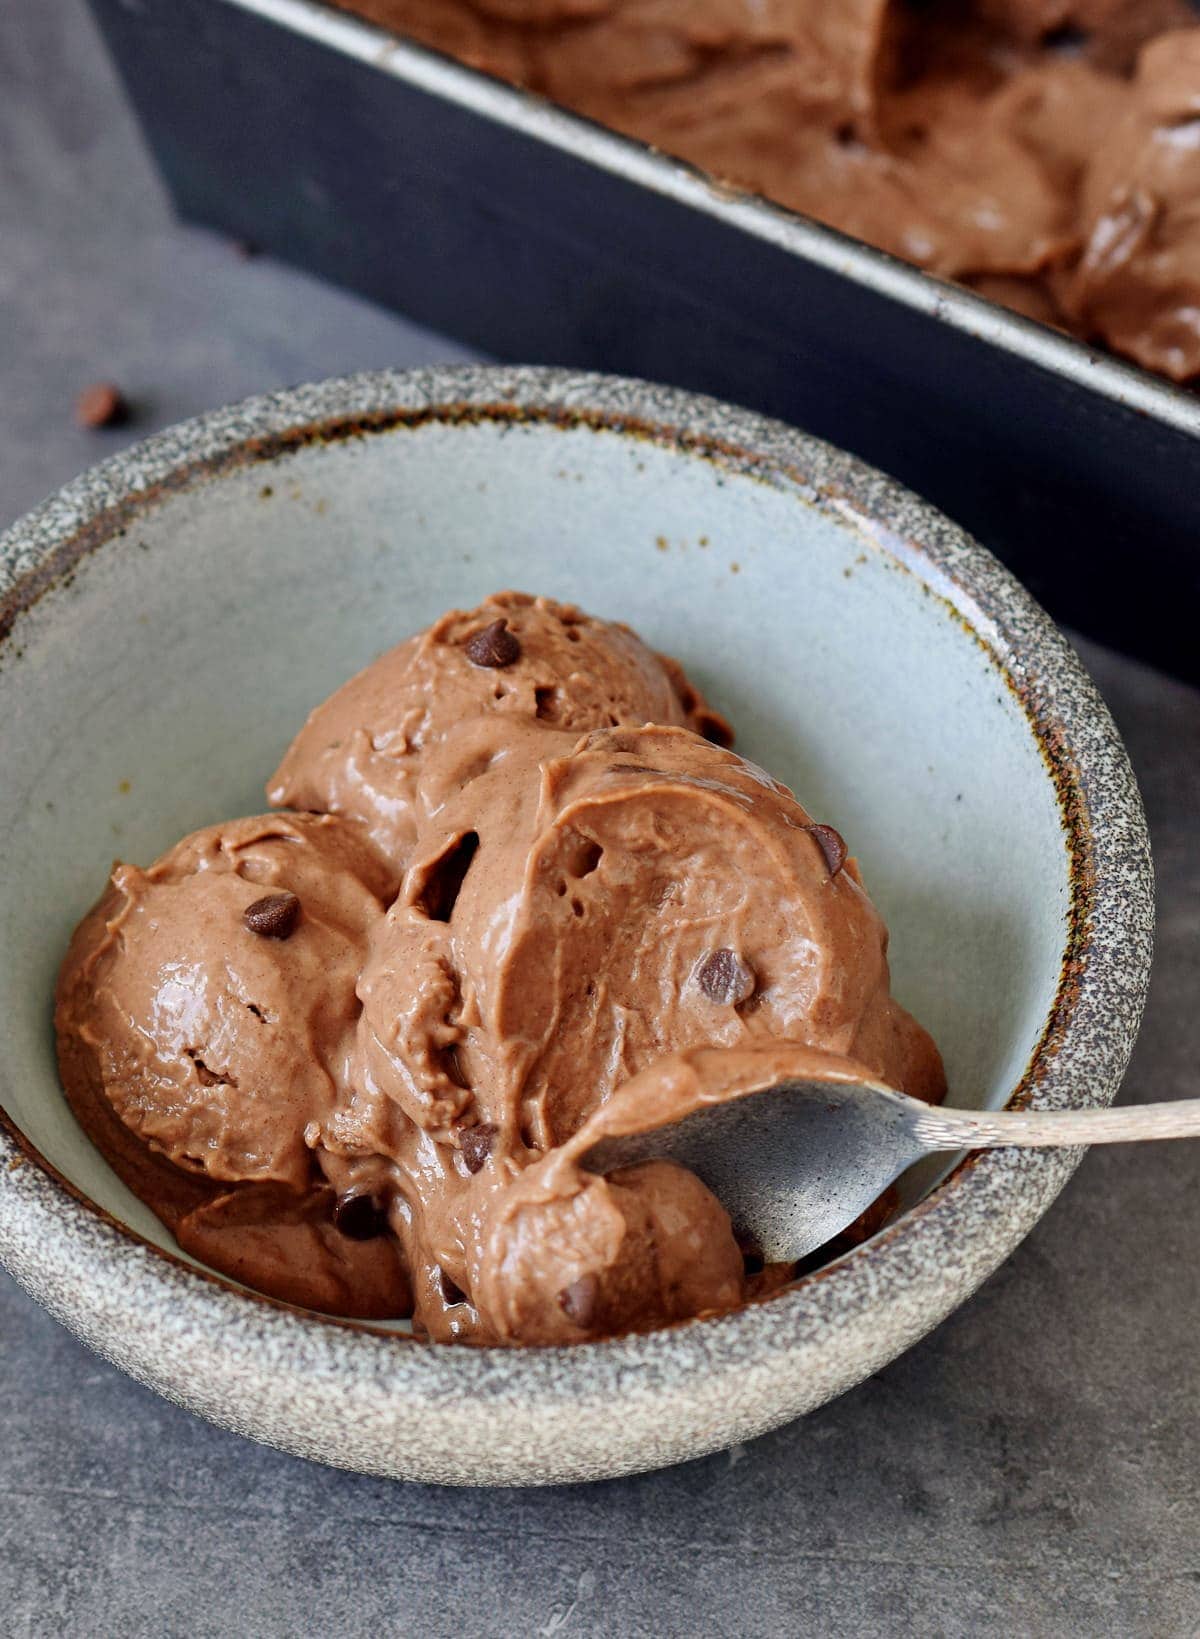 egg free chocolate soft serve in a bowl